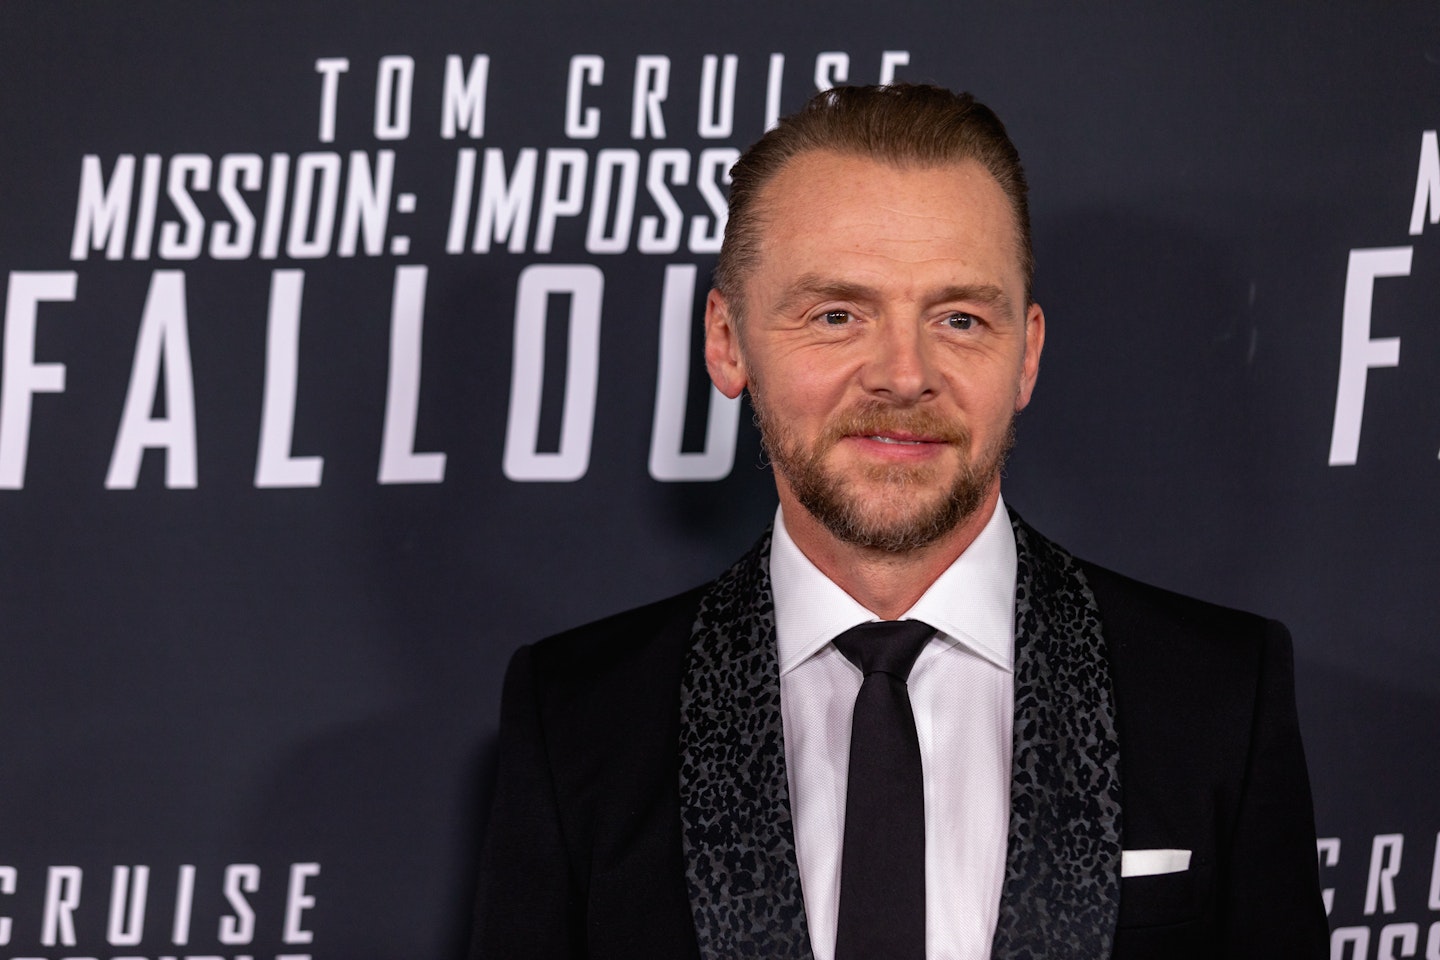 Simon Pegg at the Mission Impossible Fallout premiere